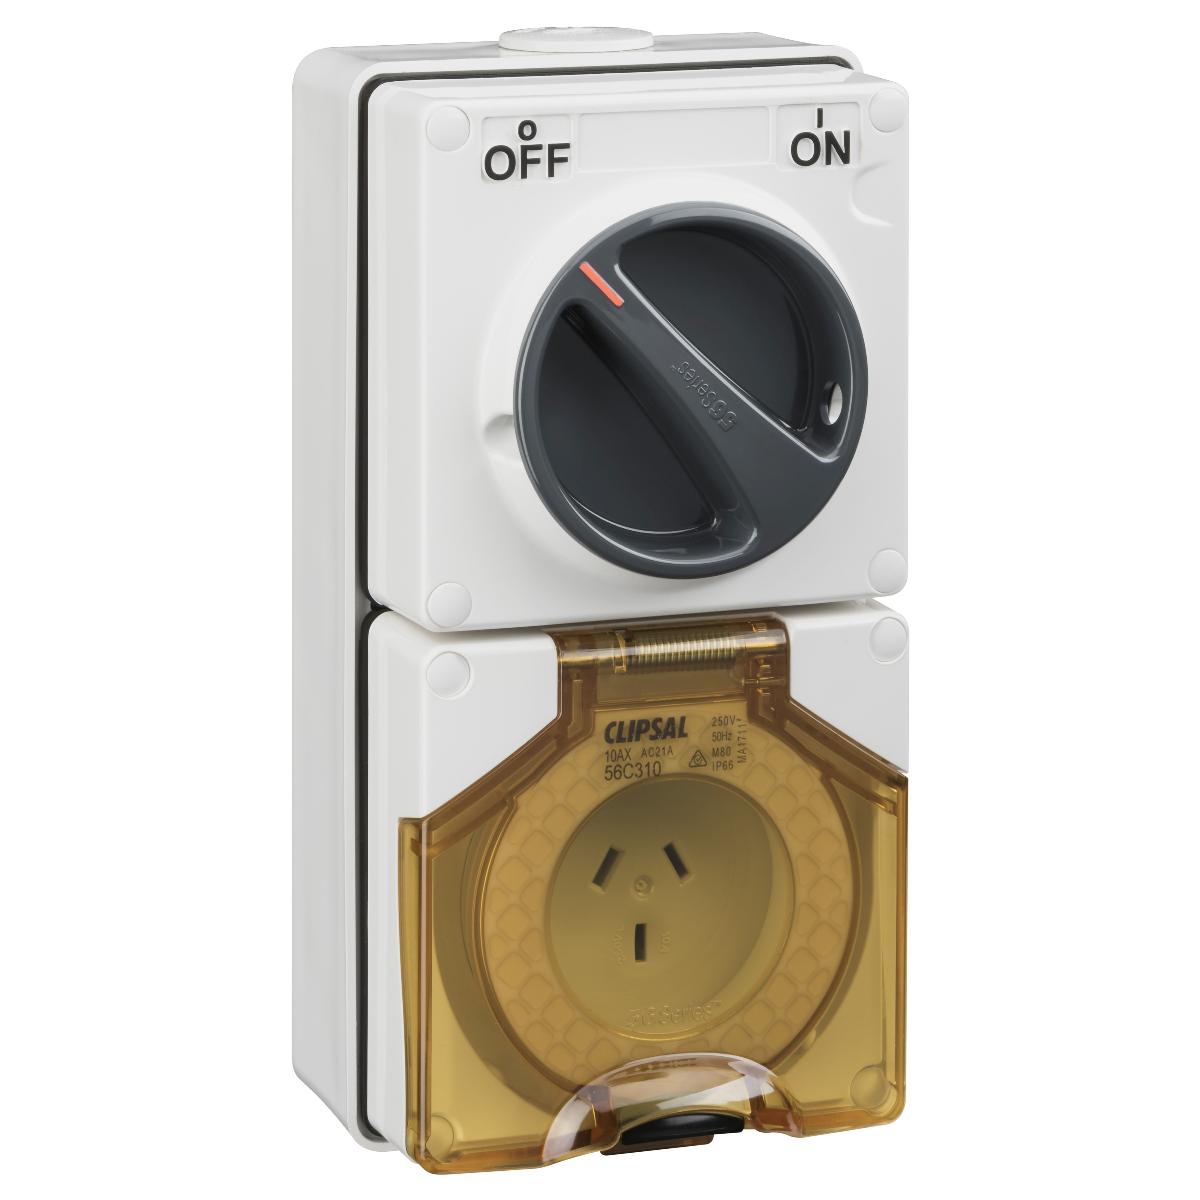 OUTLET SWITCHED IP66 3PIN 10A 250V R/WHT